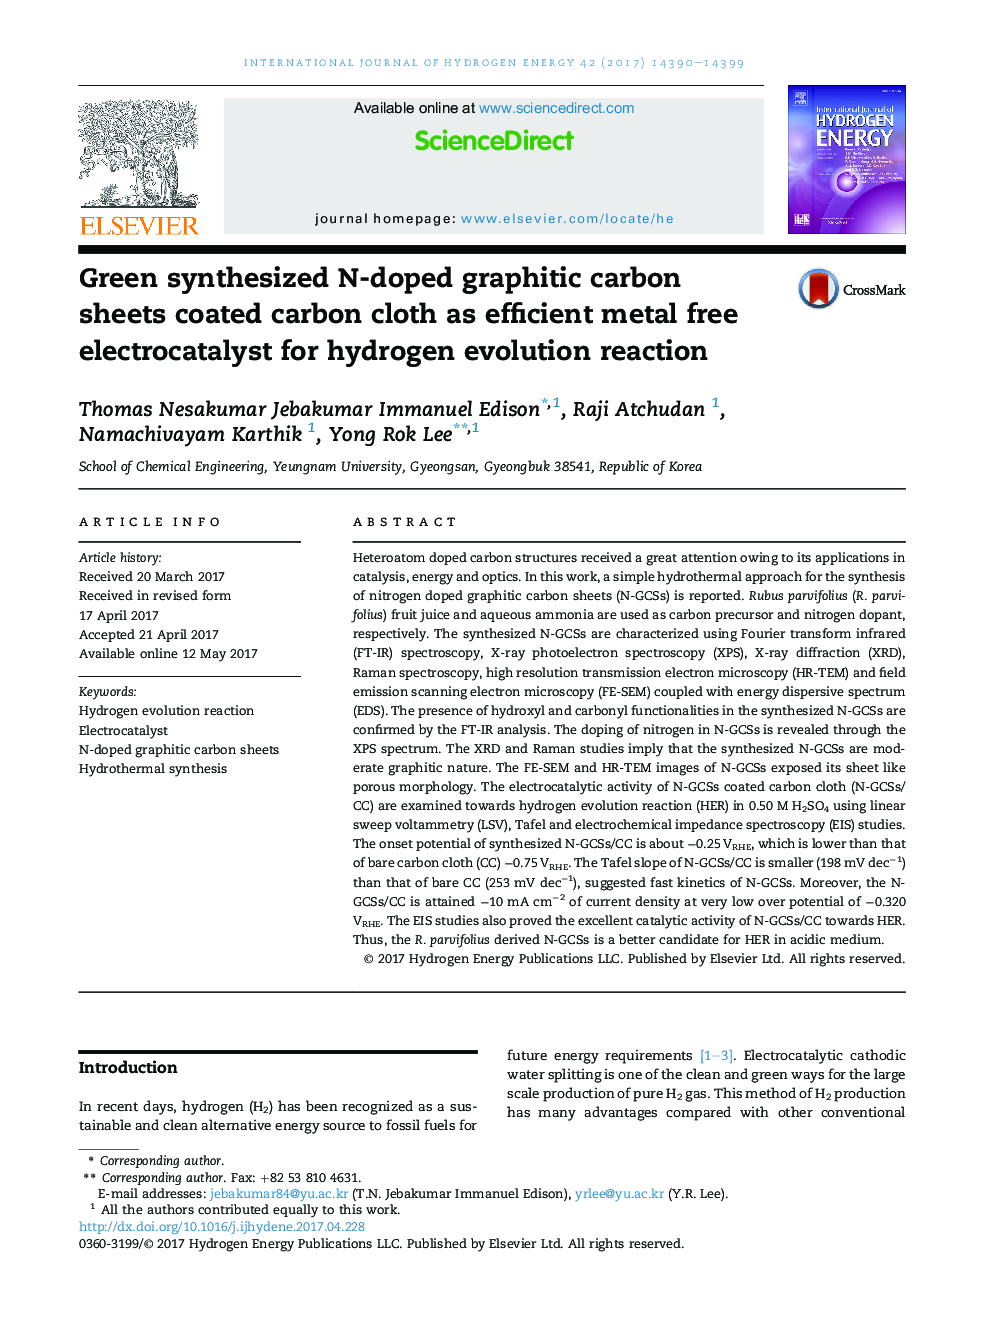 Green synthesized N-doped graphitic carbon sheets coated carbon cloth as efficient metal free electrocatalyst for hydrogen evolution reaction